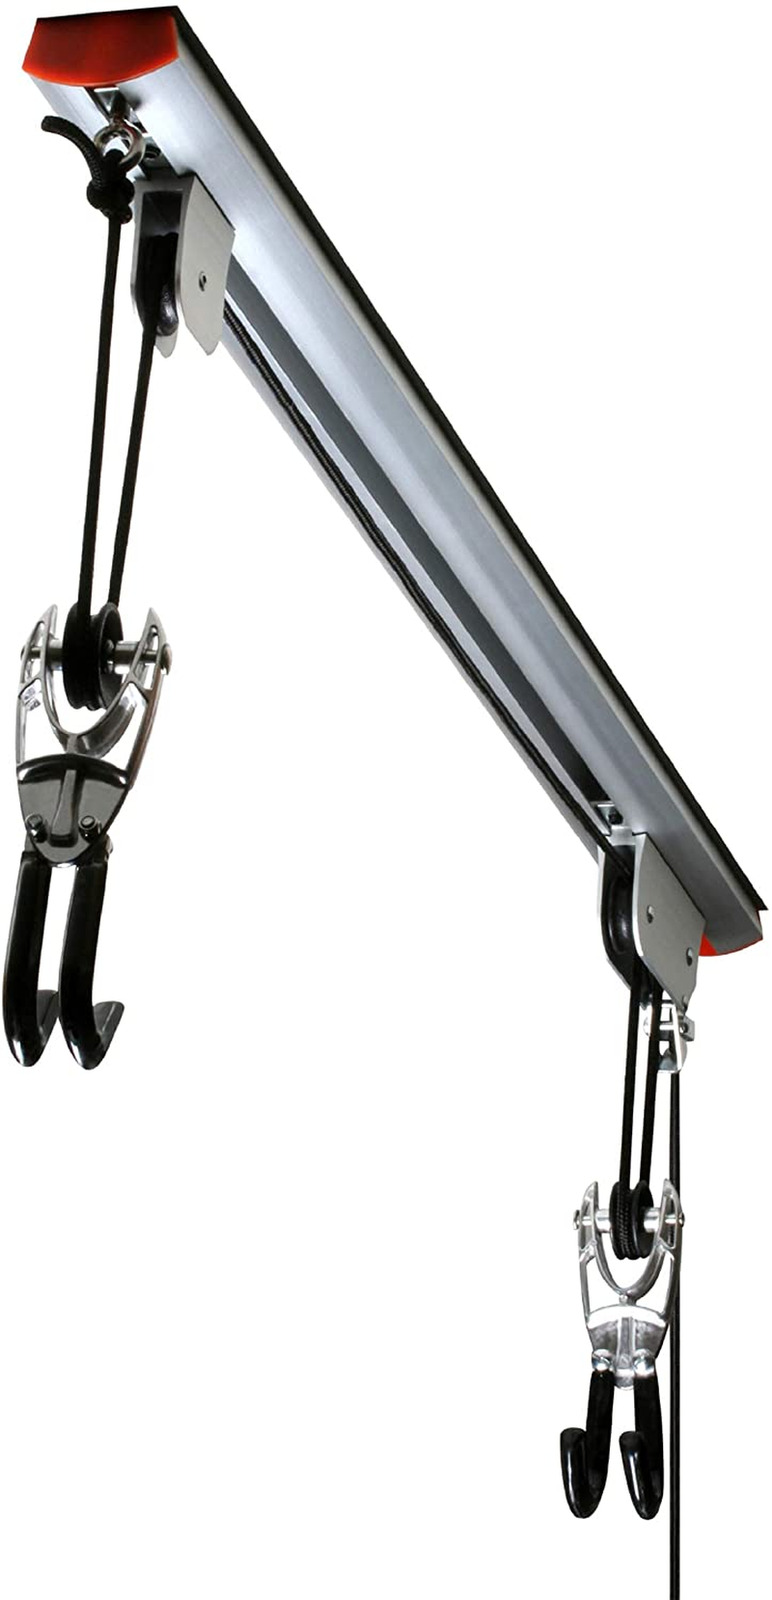 RAD Cycle Products Rail Mount Bike and Ladder Lift for Your Garage or Workshop H